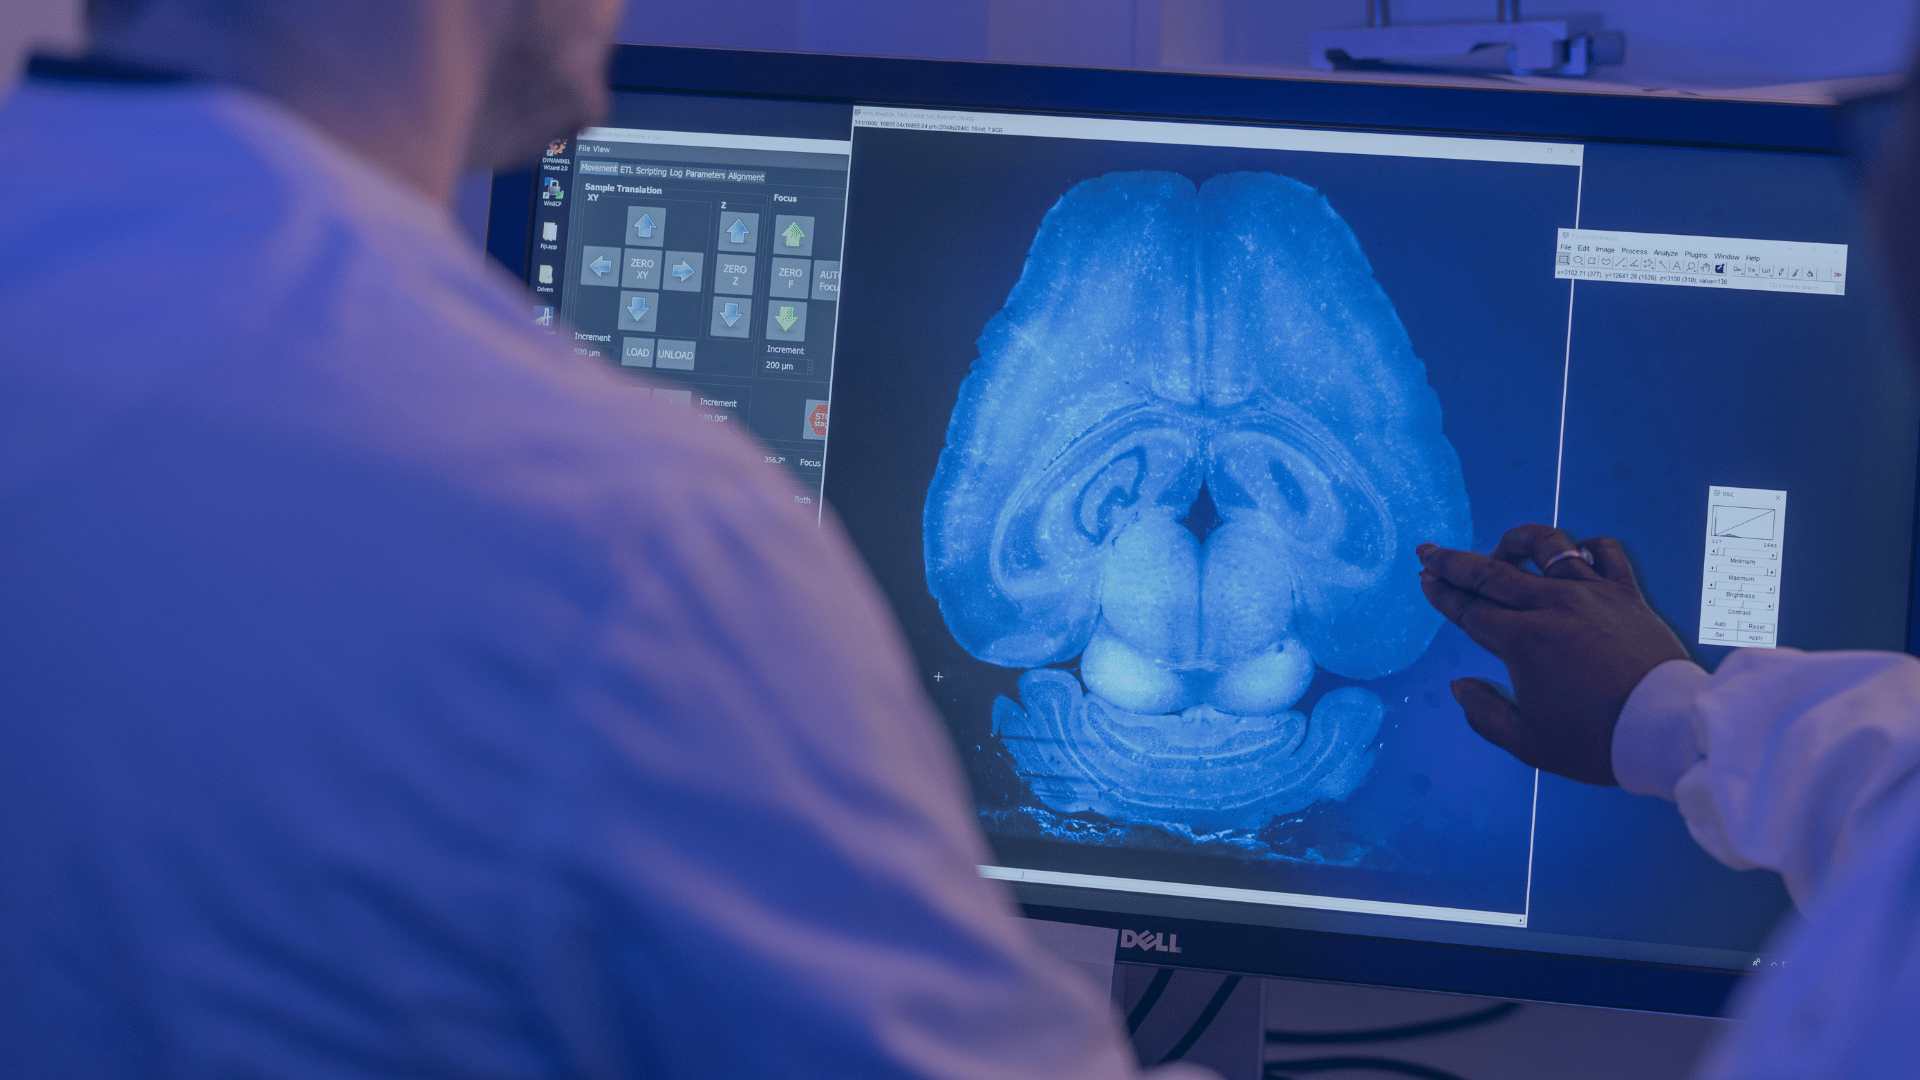 Two scientists looking at an image of a brain on a screen